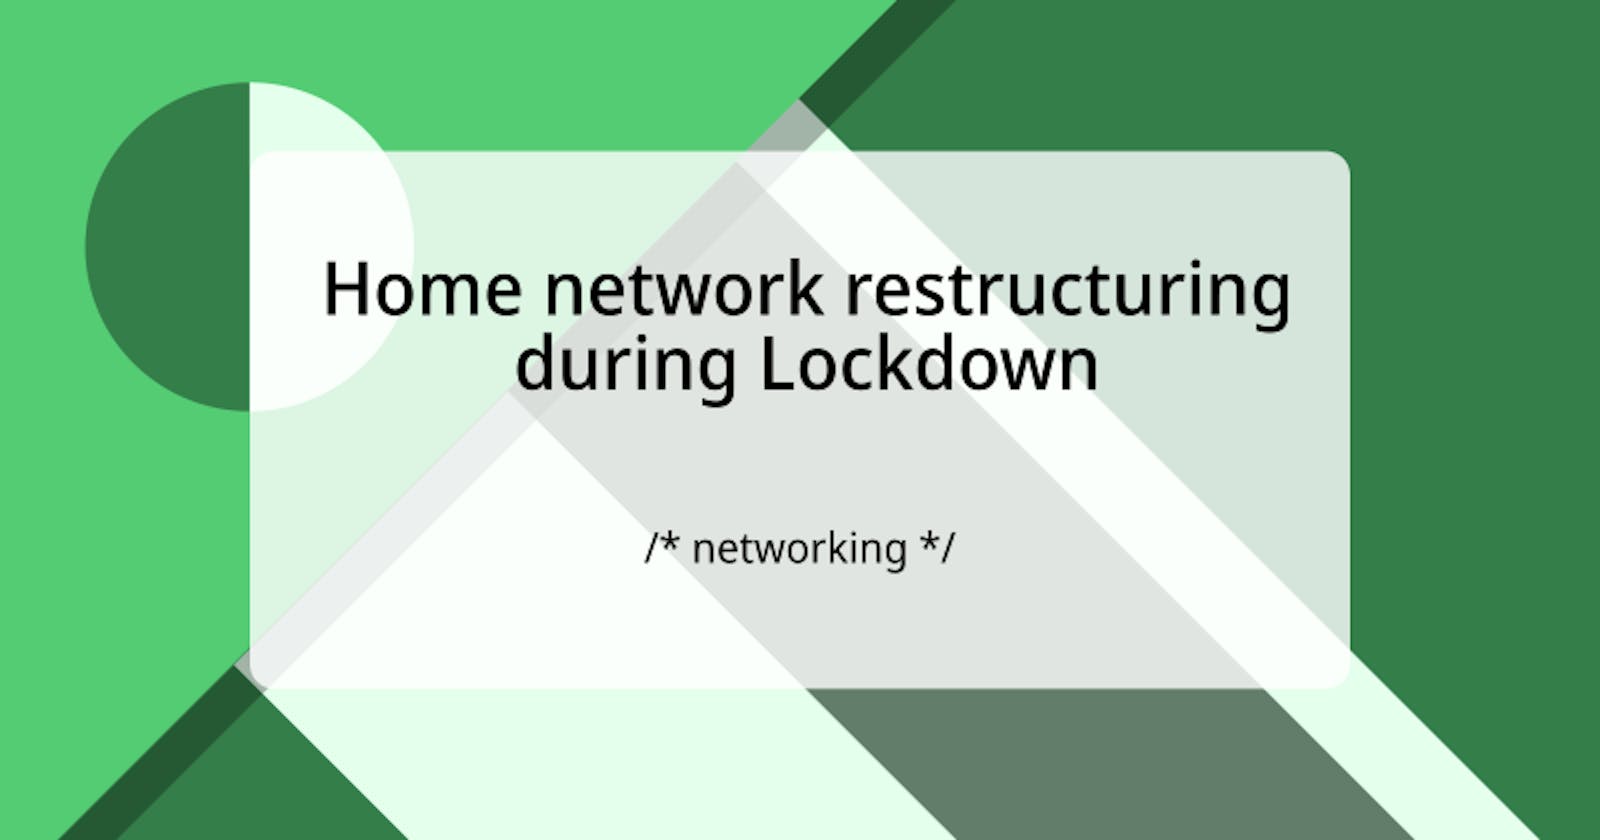 Home network restructuring during Lockdown